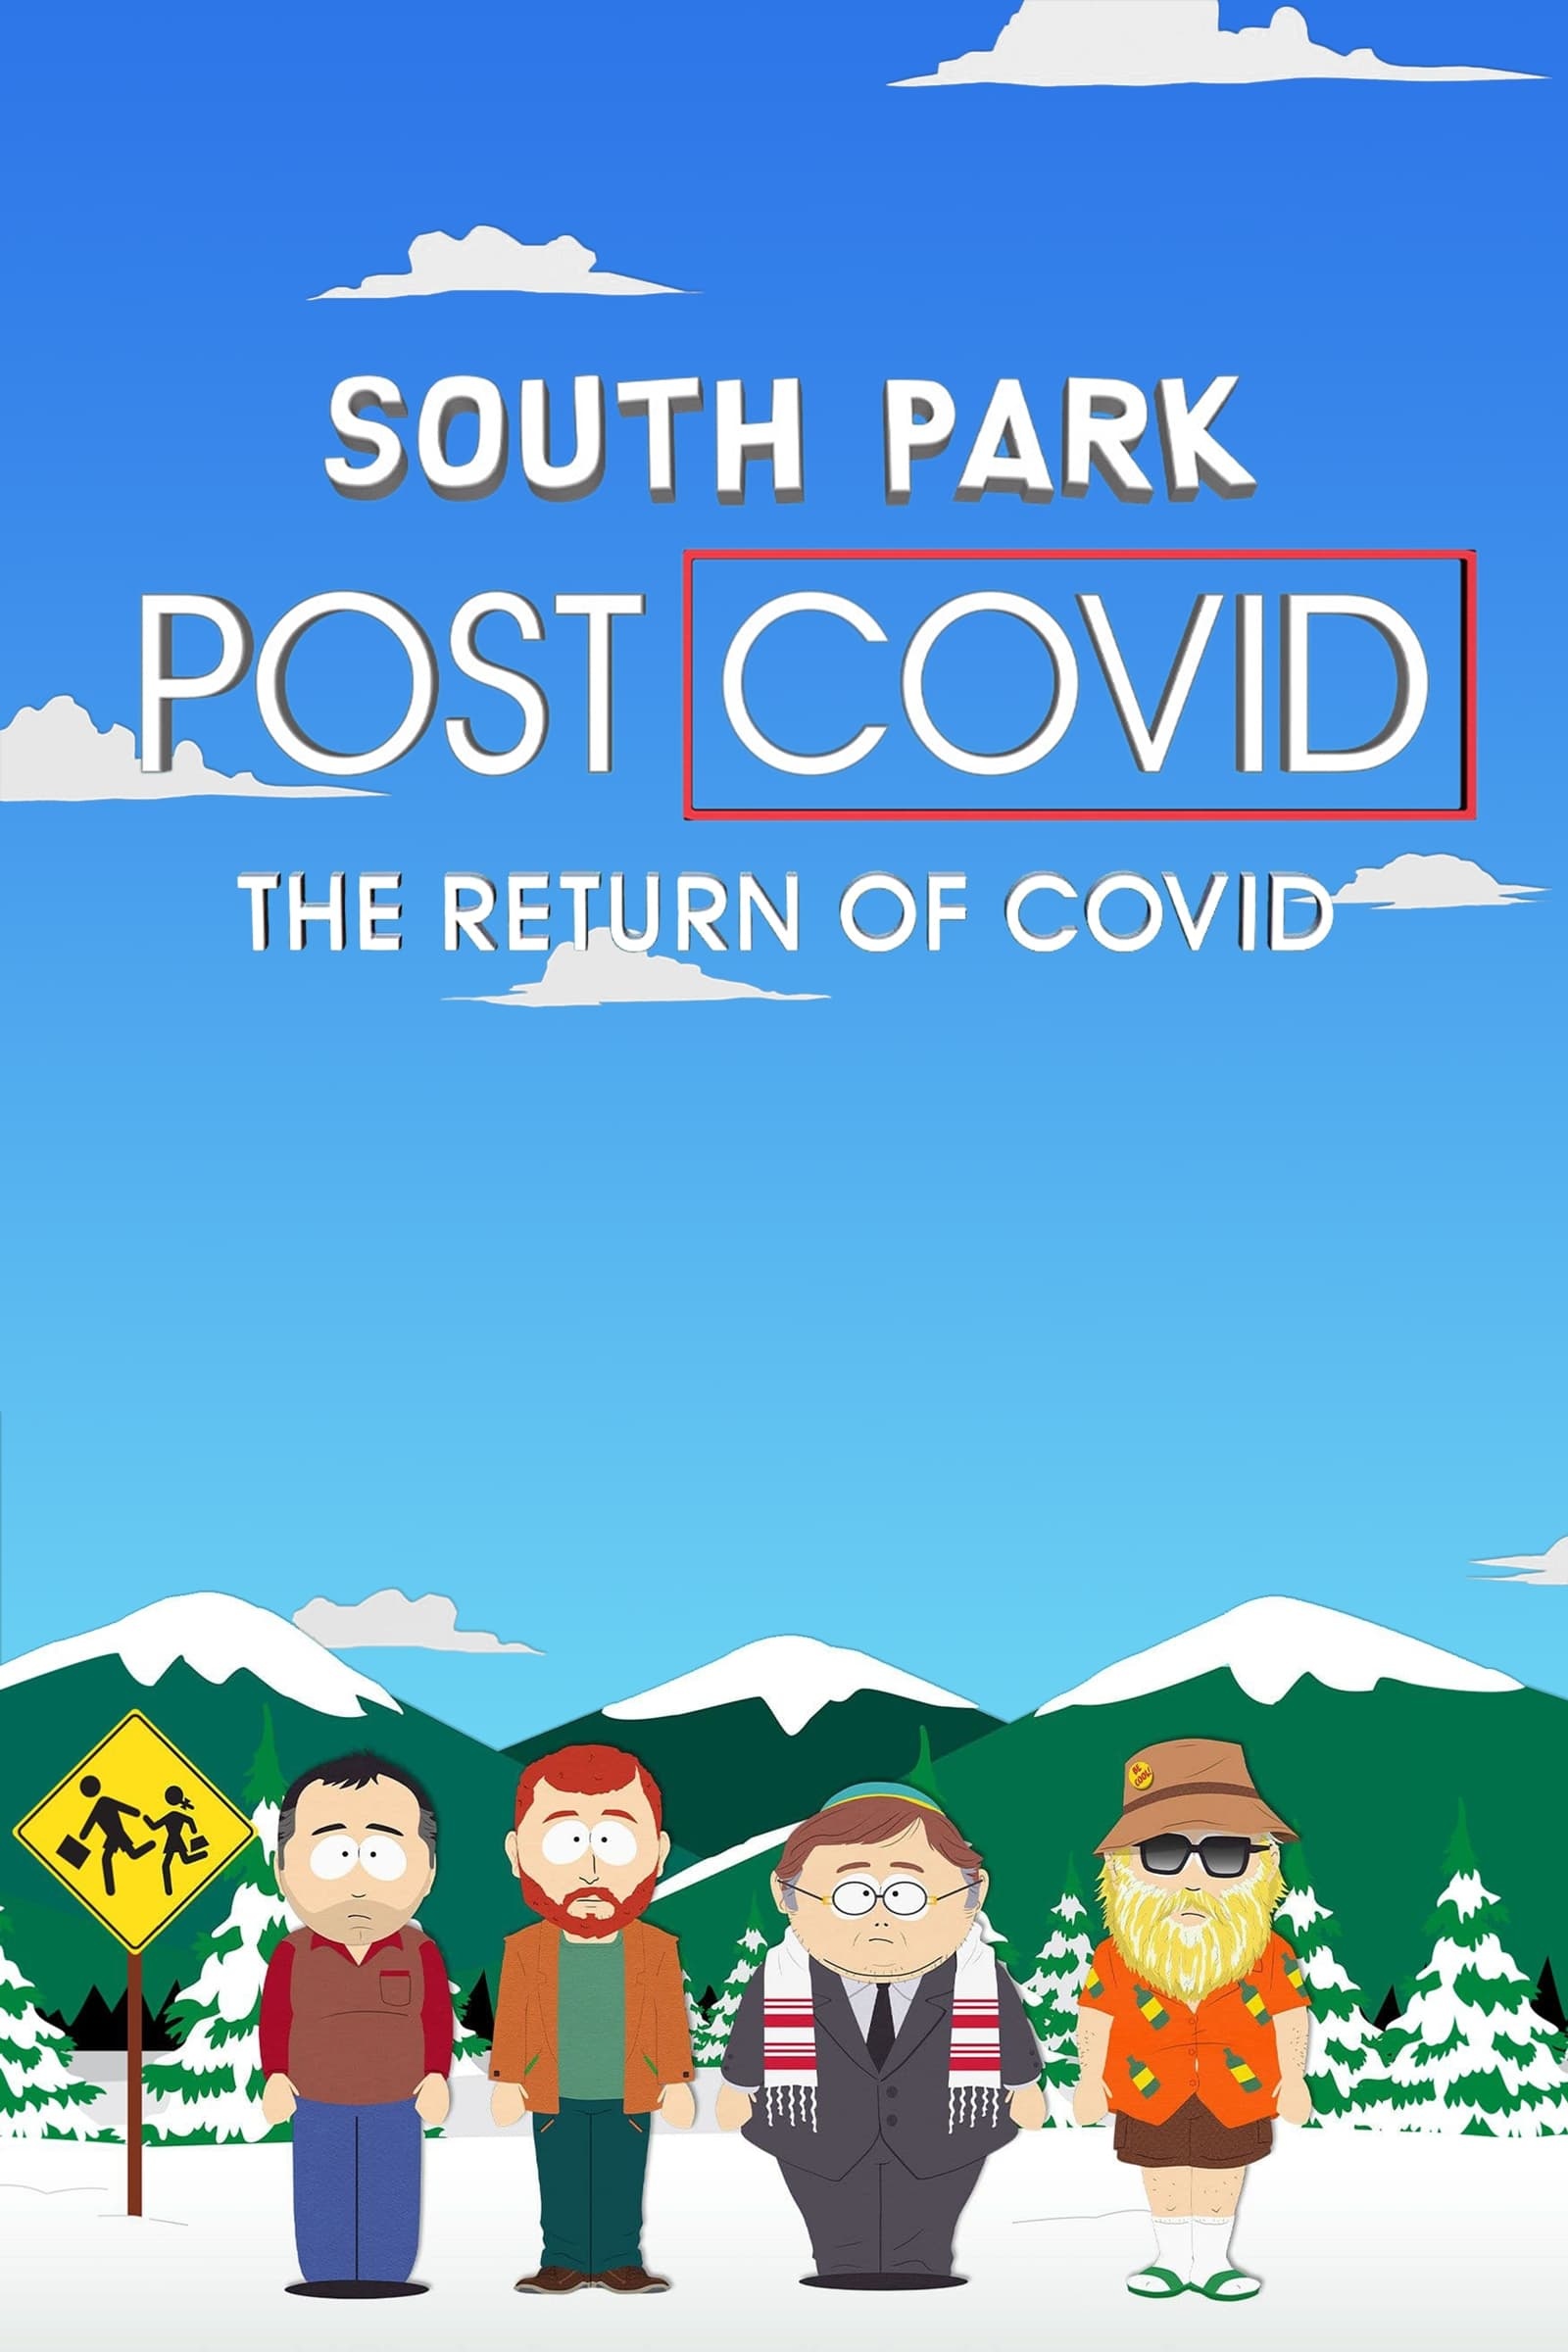 South Park: Post Covid, Full movie online, Streaming on Plex, Enjoy from the comfort of home, 1600x2400 HD Handy